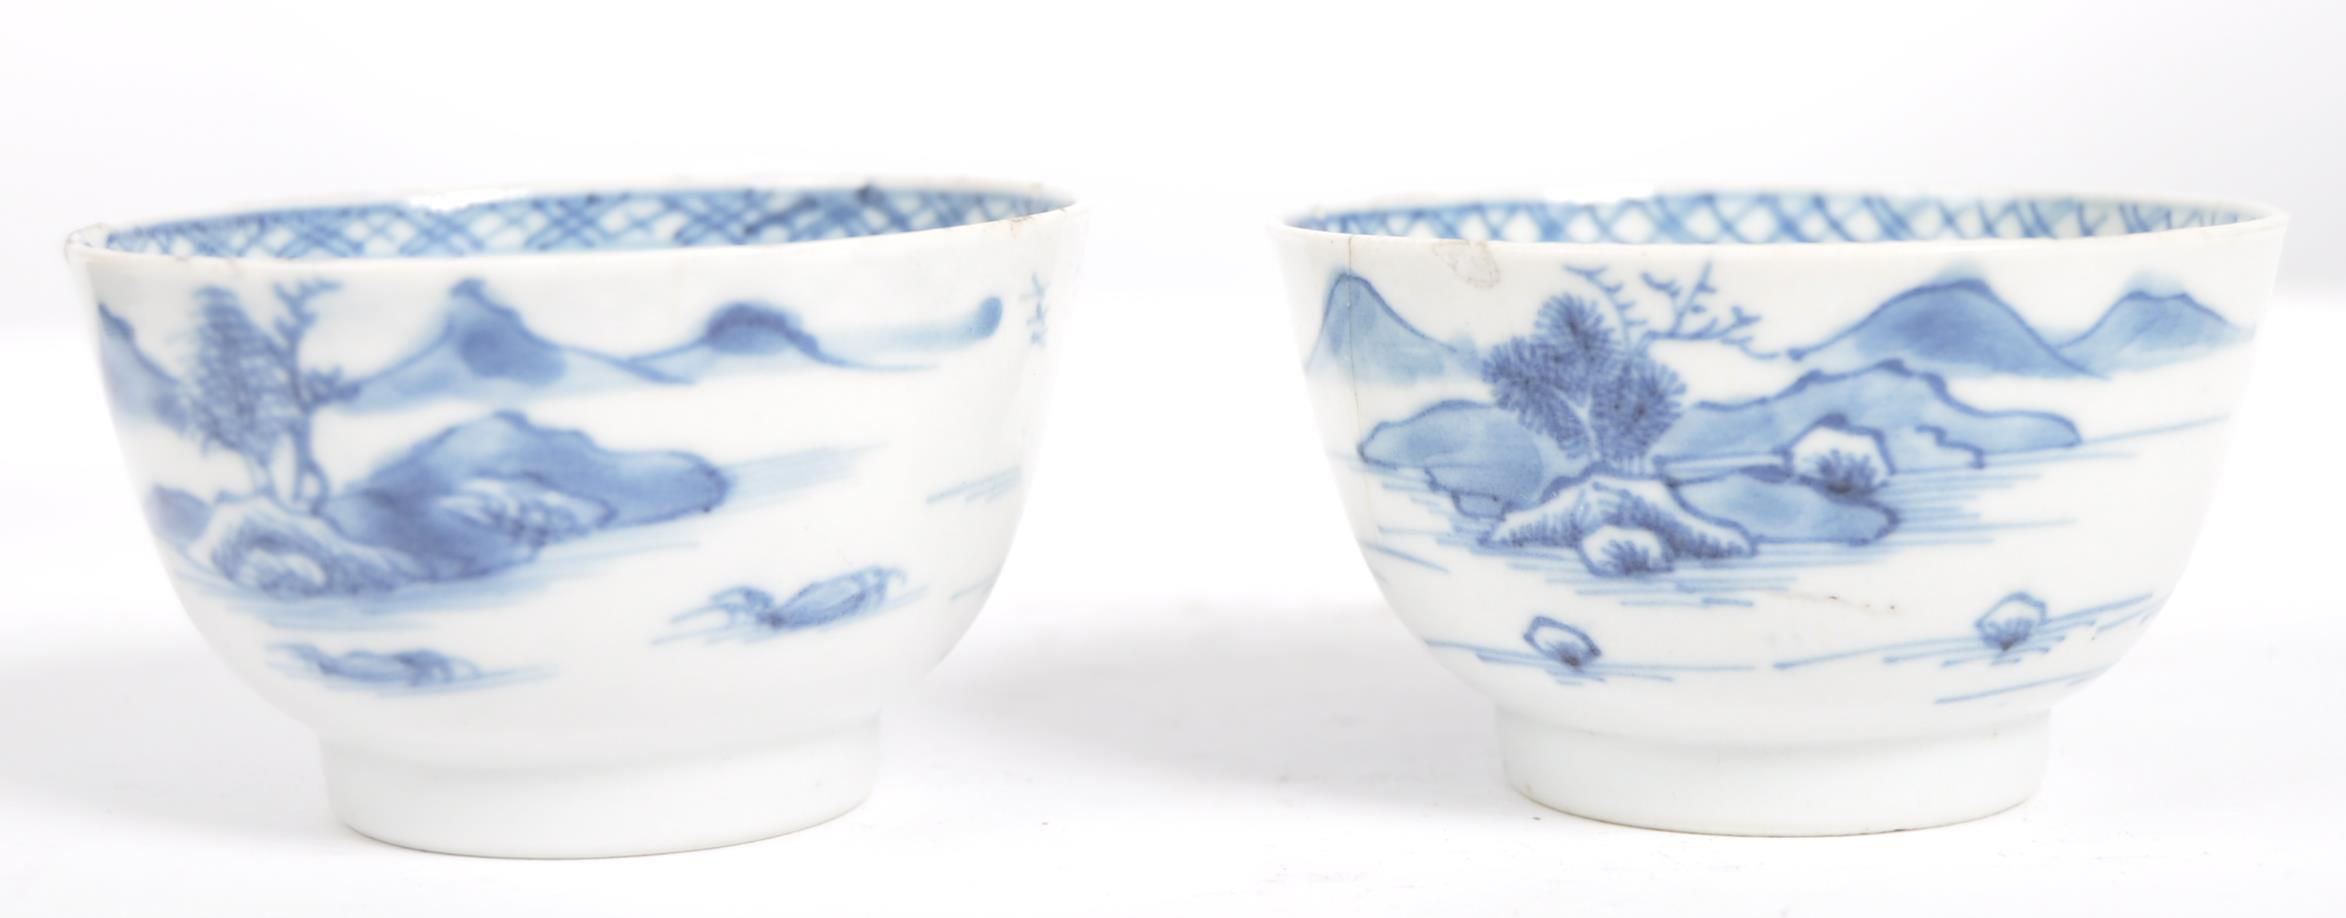 PAIR OF 19TH CENTURY CHINESE TEA BOWLS - Image 3 of 5